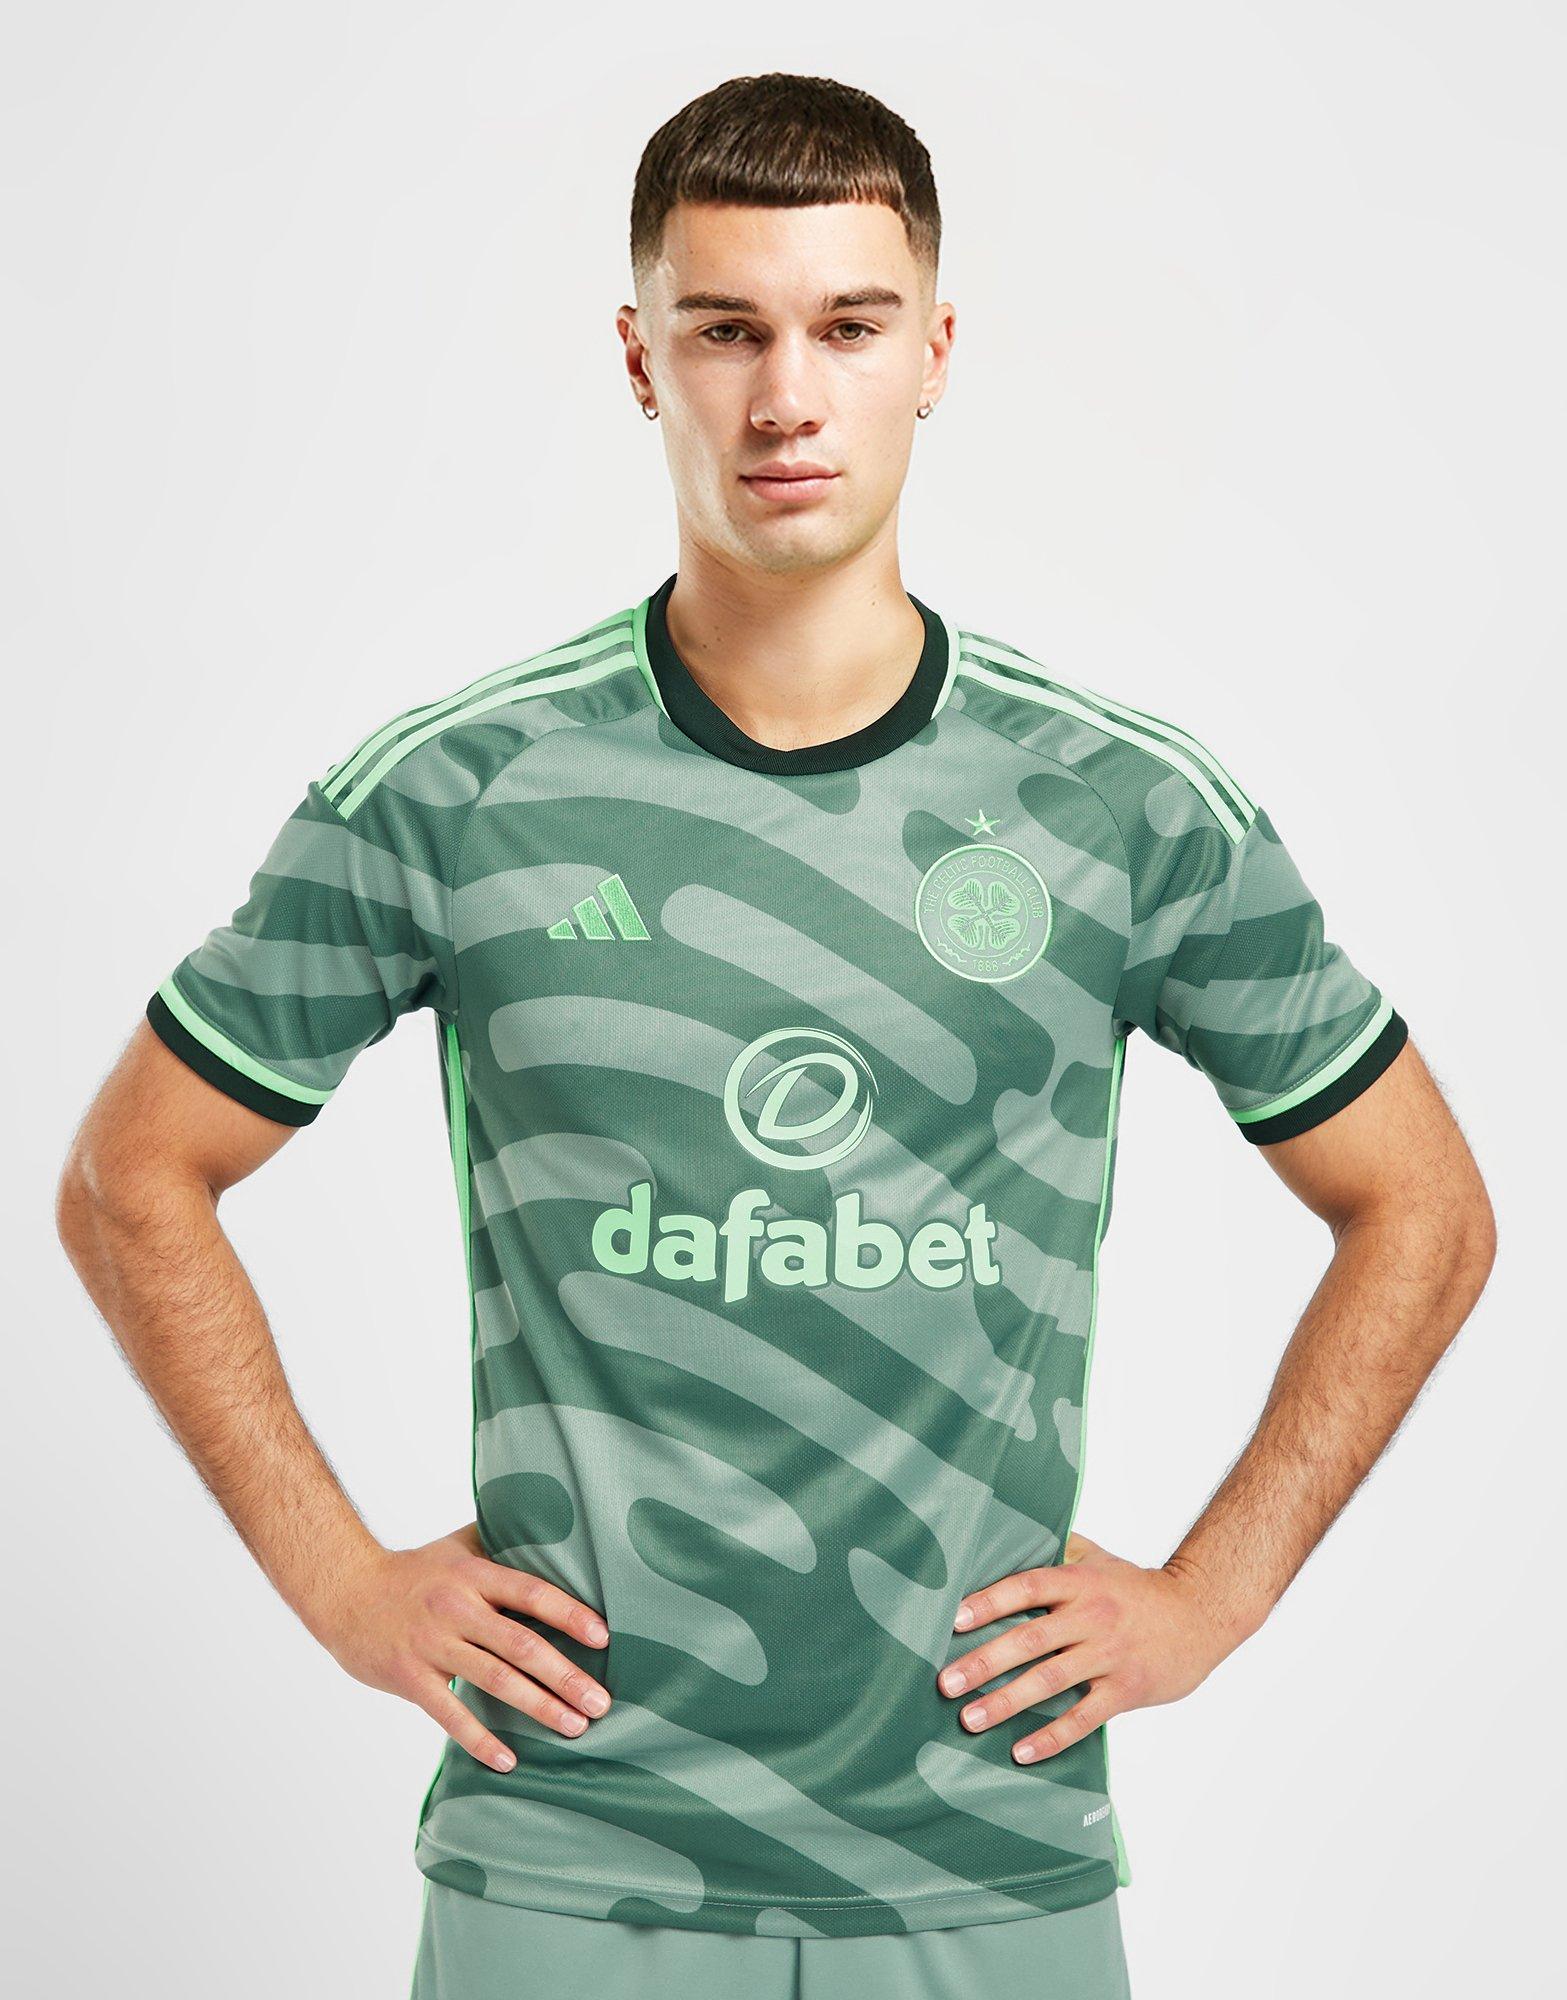 Celtic 2021/22 kits: New home shirt leaked online with Hoops to